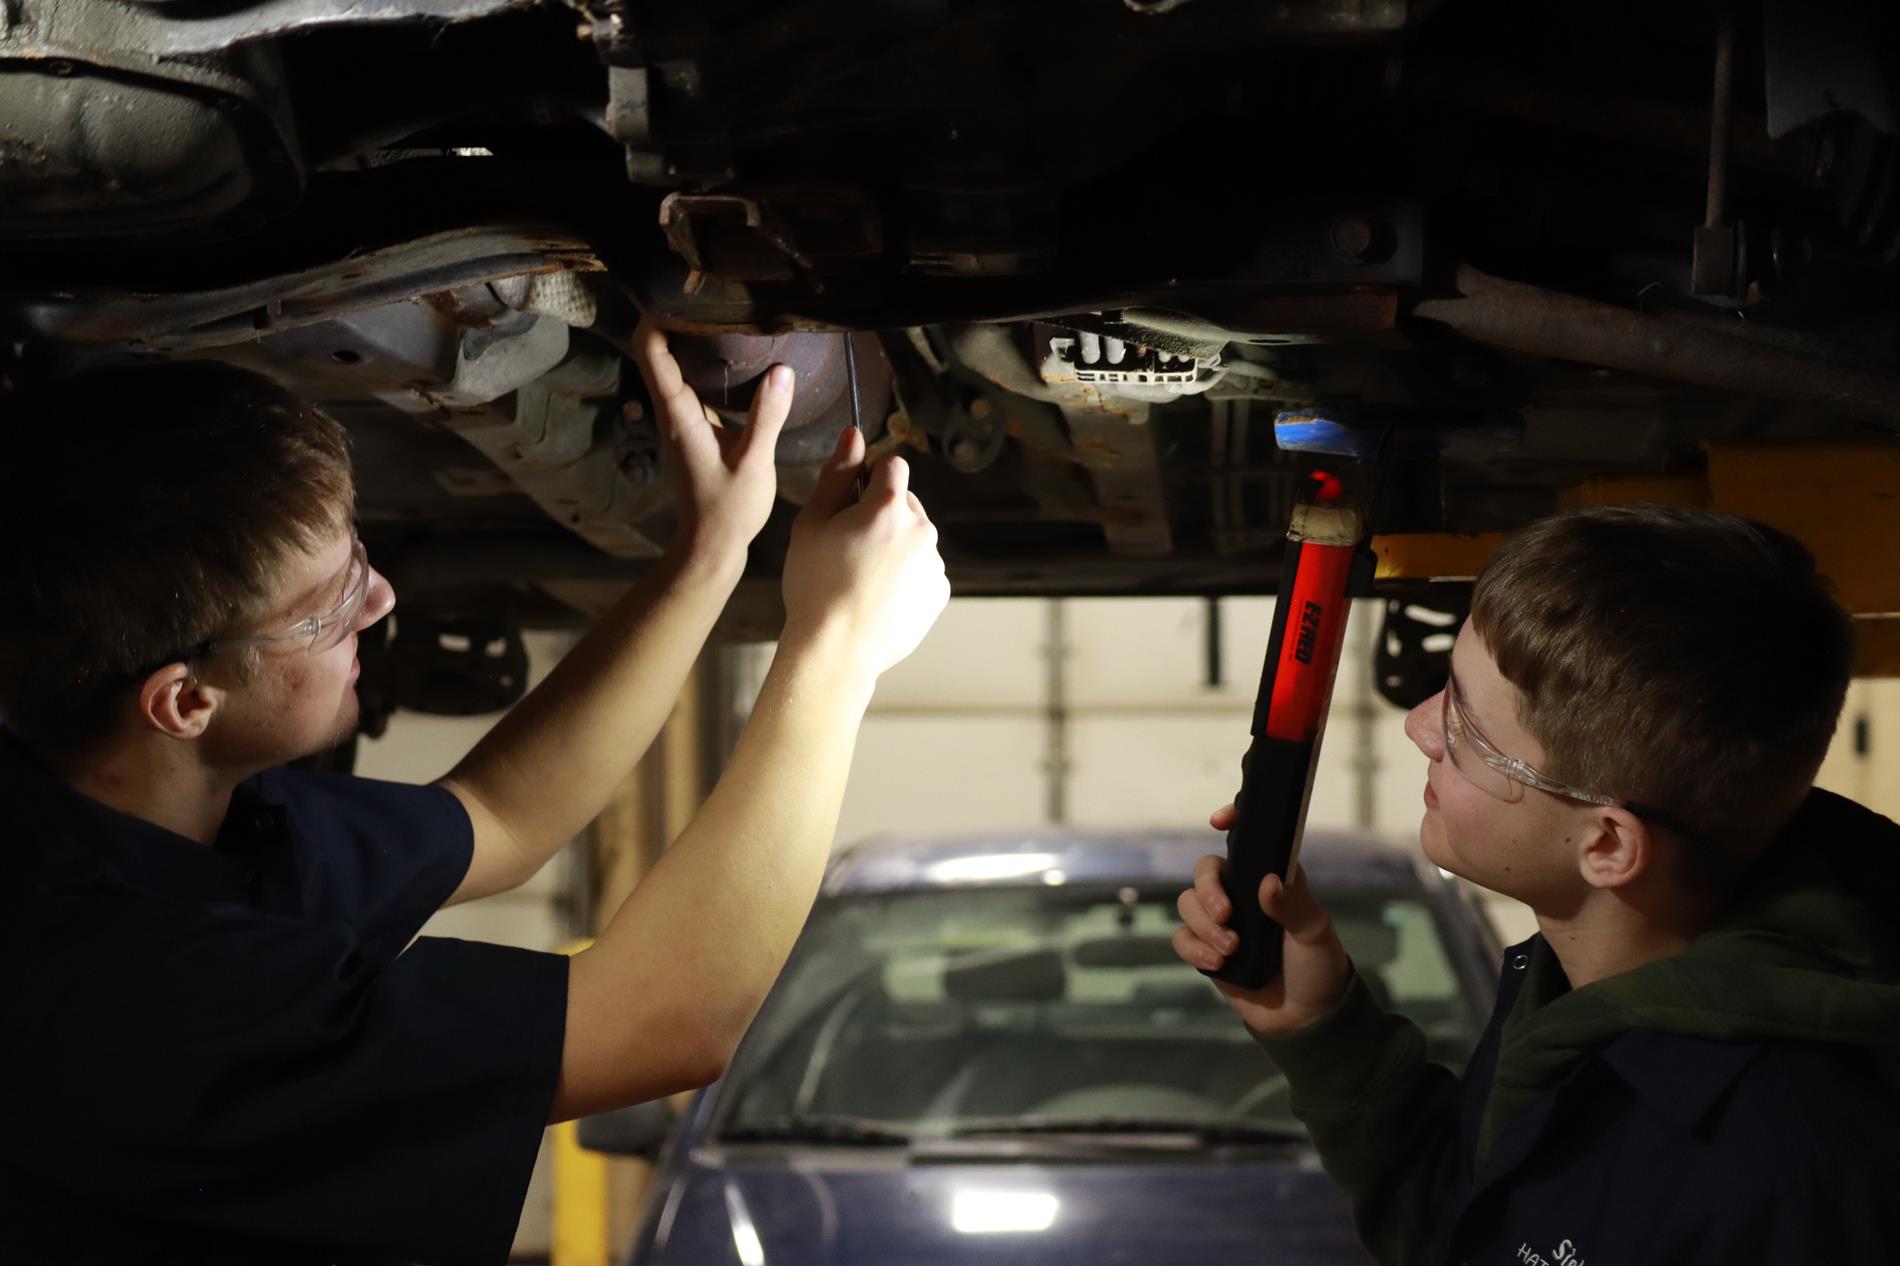 Hands-on work is a daily task in Auto.